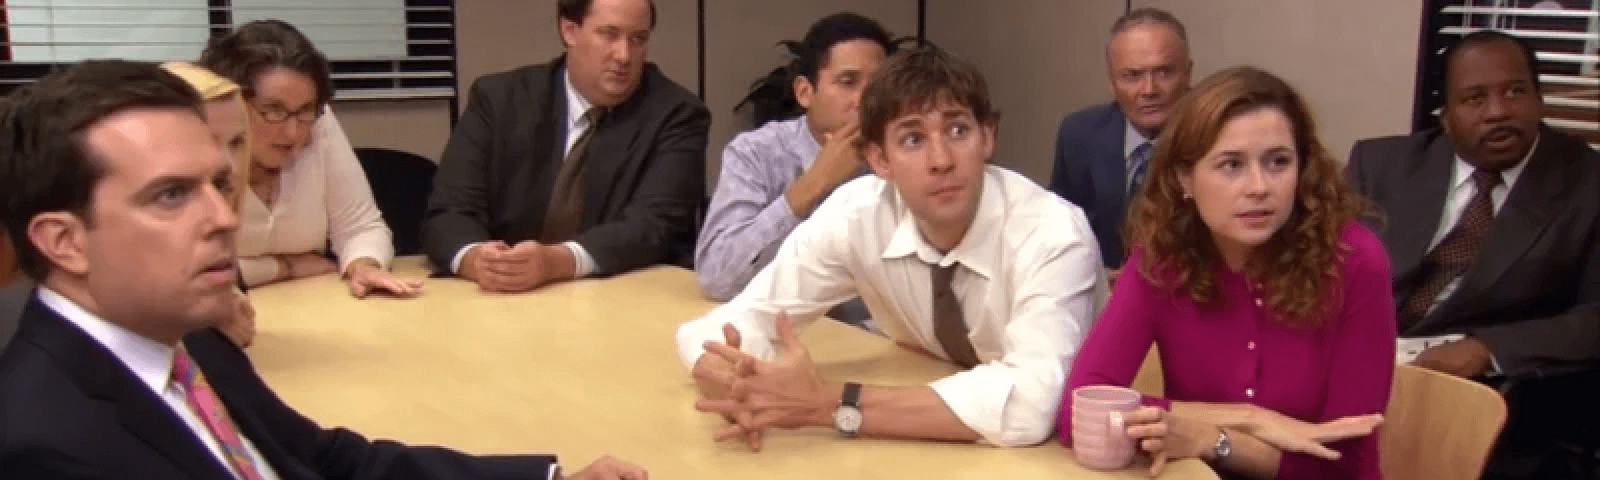 Image of a scene from the TV show ‘The Office’